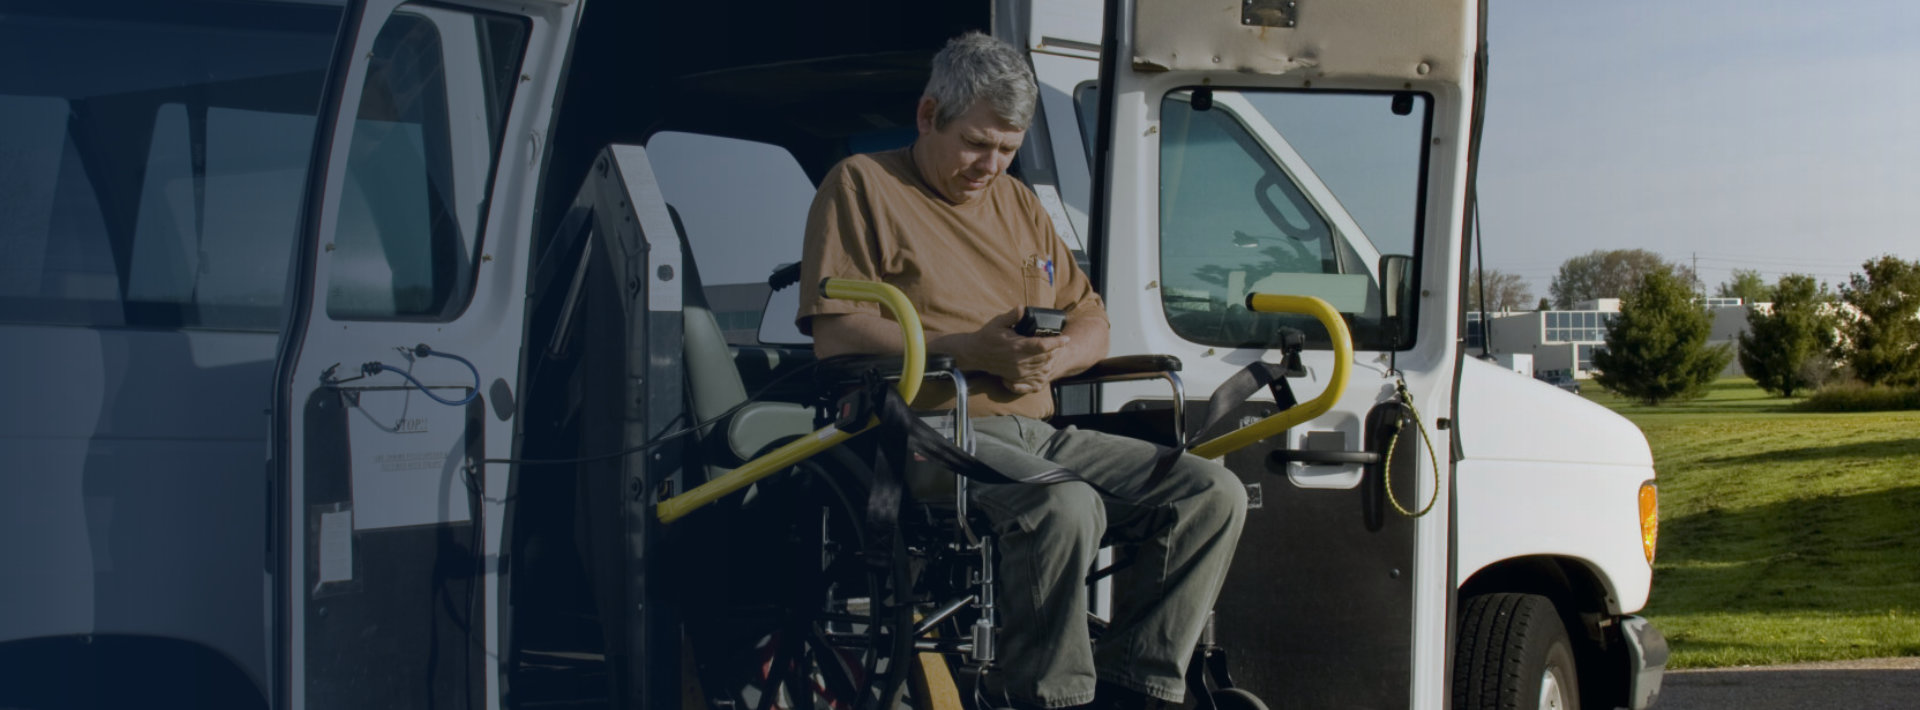 disabled man getting off from the transportation vehicle